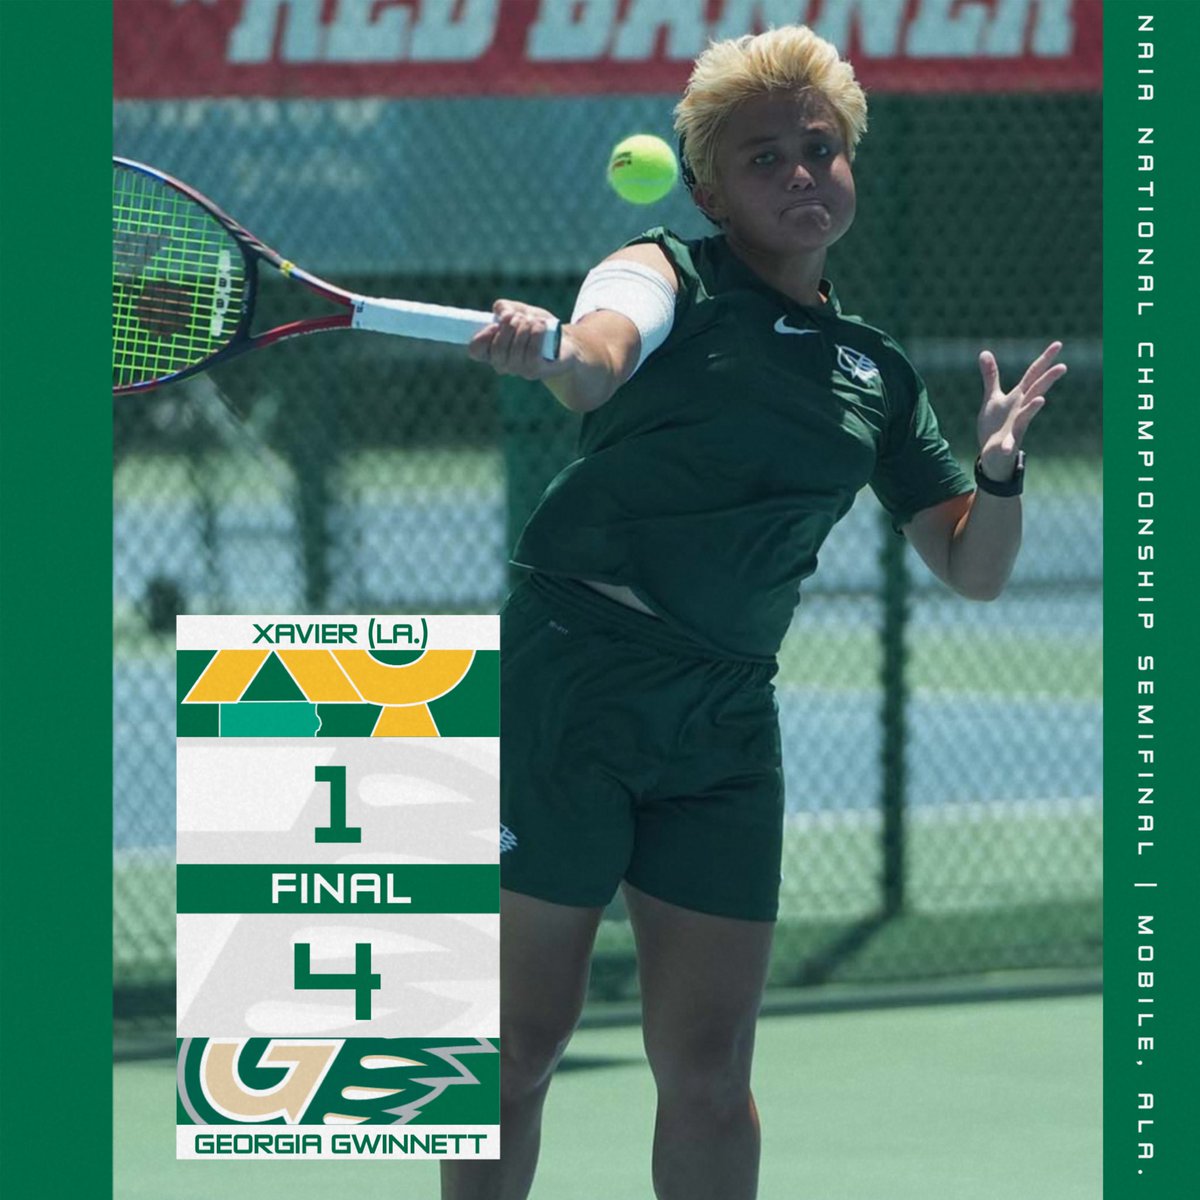 GRIZZLIES WIN! Versace Gatti wins a second-set tiebreaker at No. 4 singles to send the Grizzlies to the NAIA National Championship match. Iryna Lysykh also won in a second-set tiebreaker on the No. 2 court. #GGCAthletics | #BattleForTheRedBanner